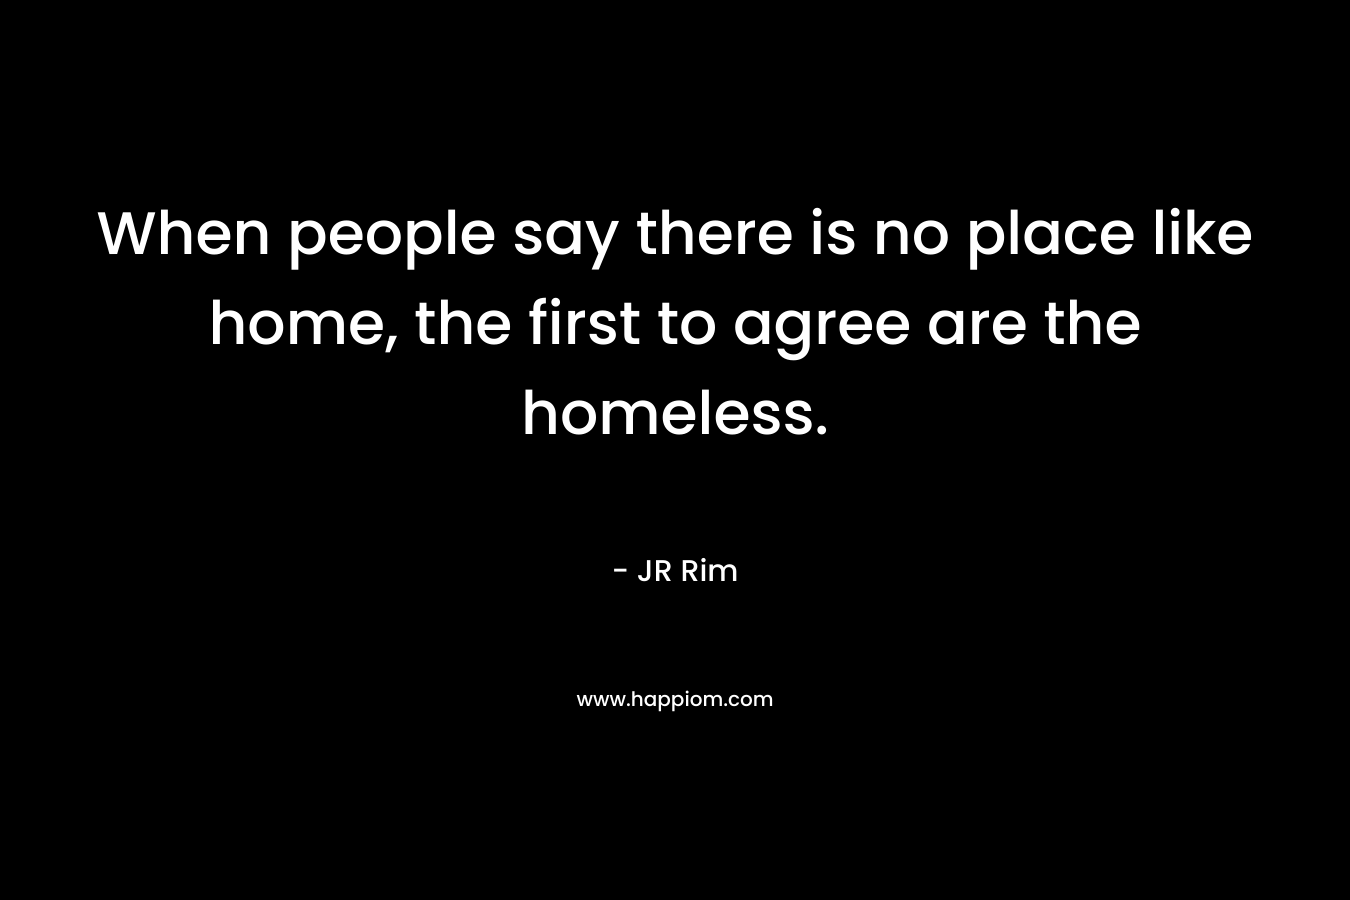 When people say there is no place like home, the first to agree are the homeless.